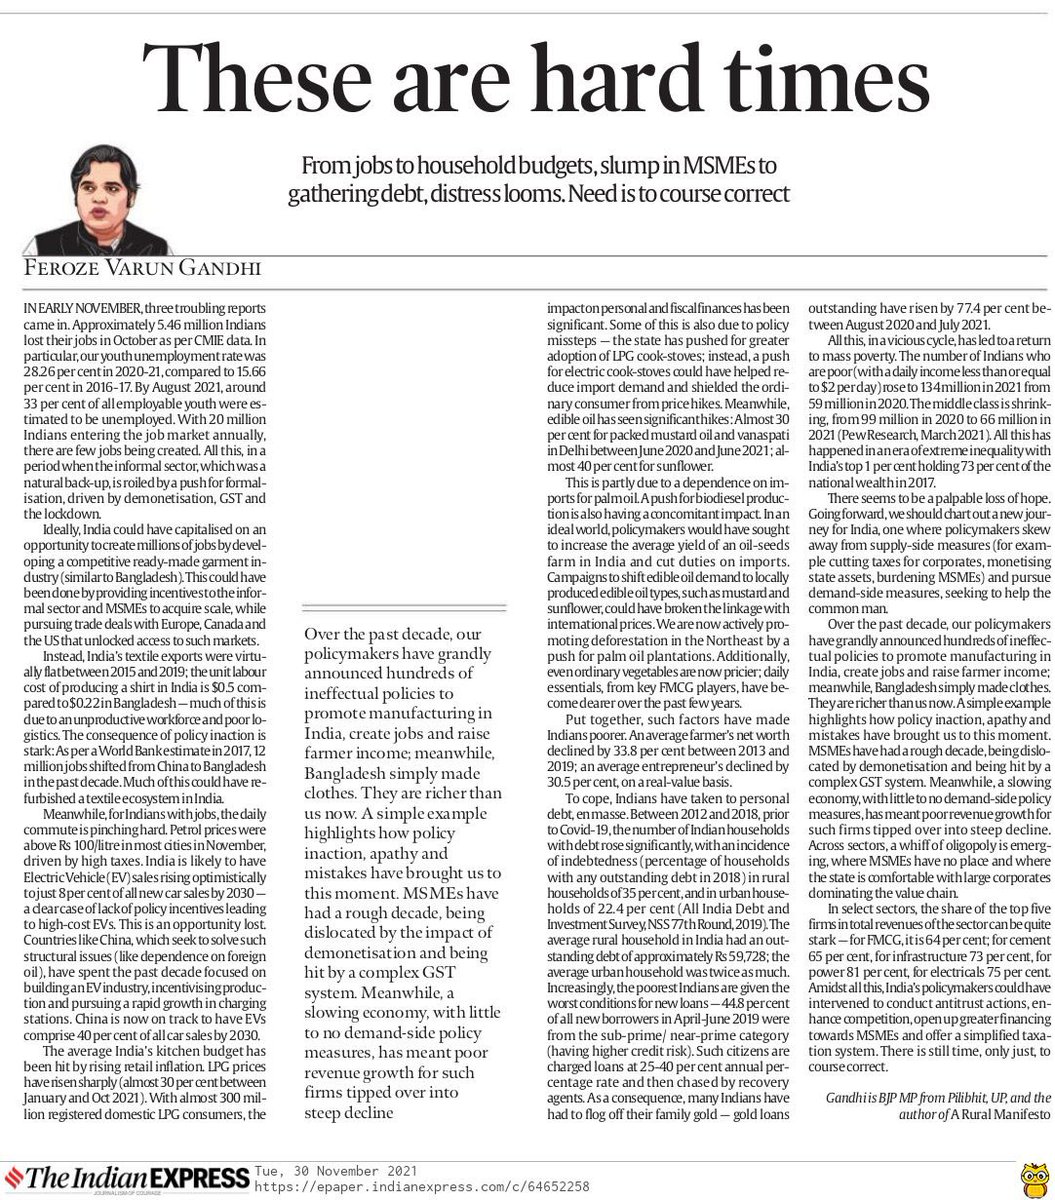 As India battles rising unemployment, higher inflation and increasing personal debt, my article in The @IndianExpress seeks to understand if much of this can be traced back to policy mistakes and apathy... indianexpress.com/article/opinio…